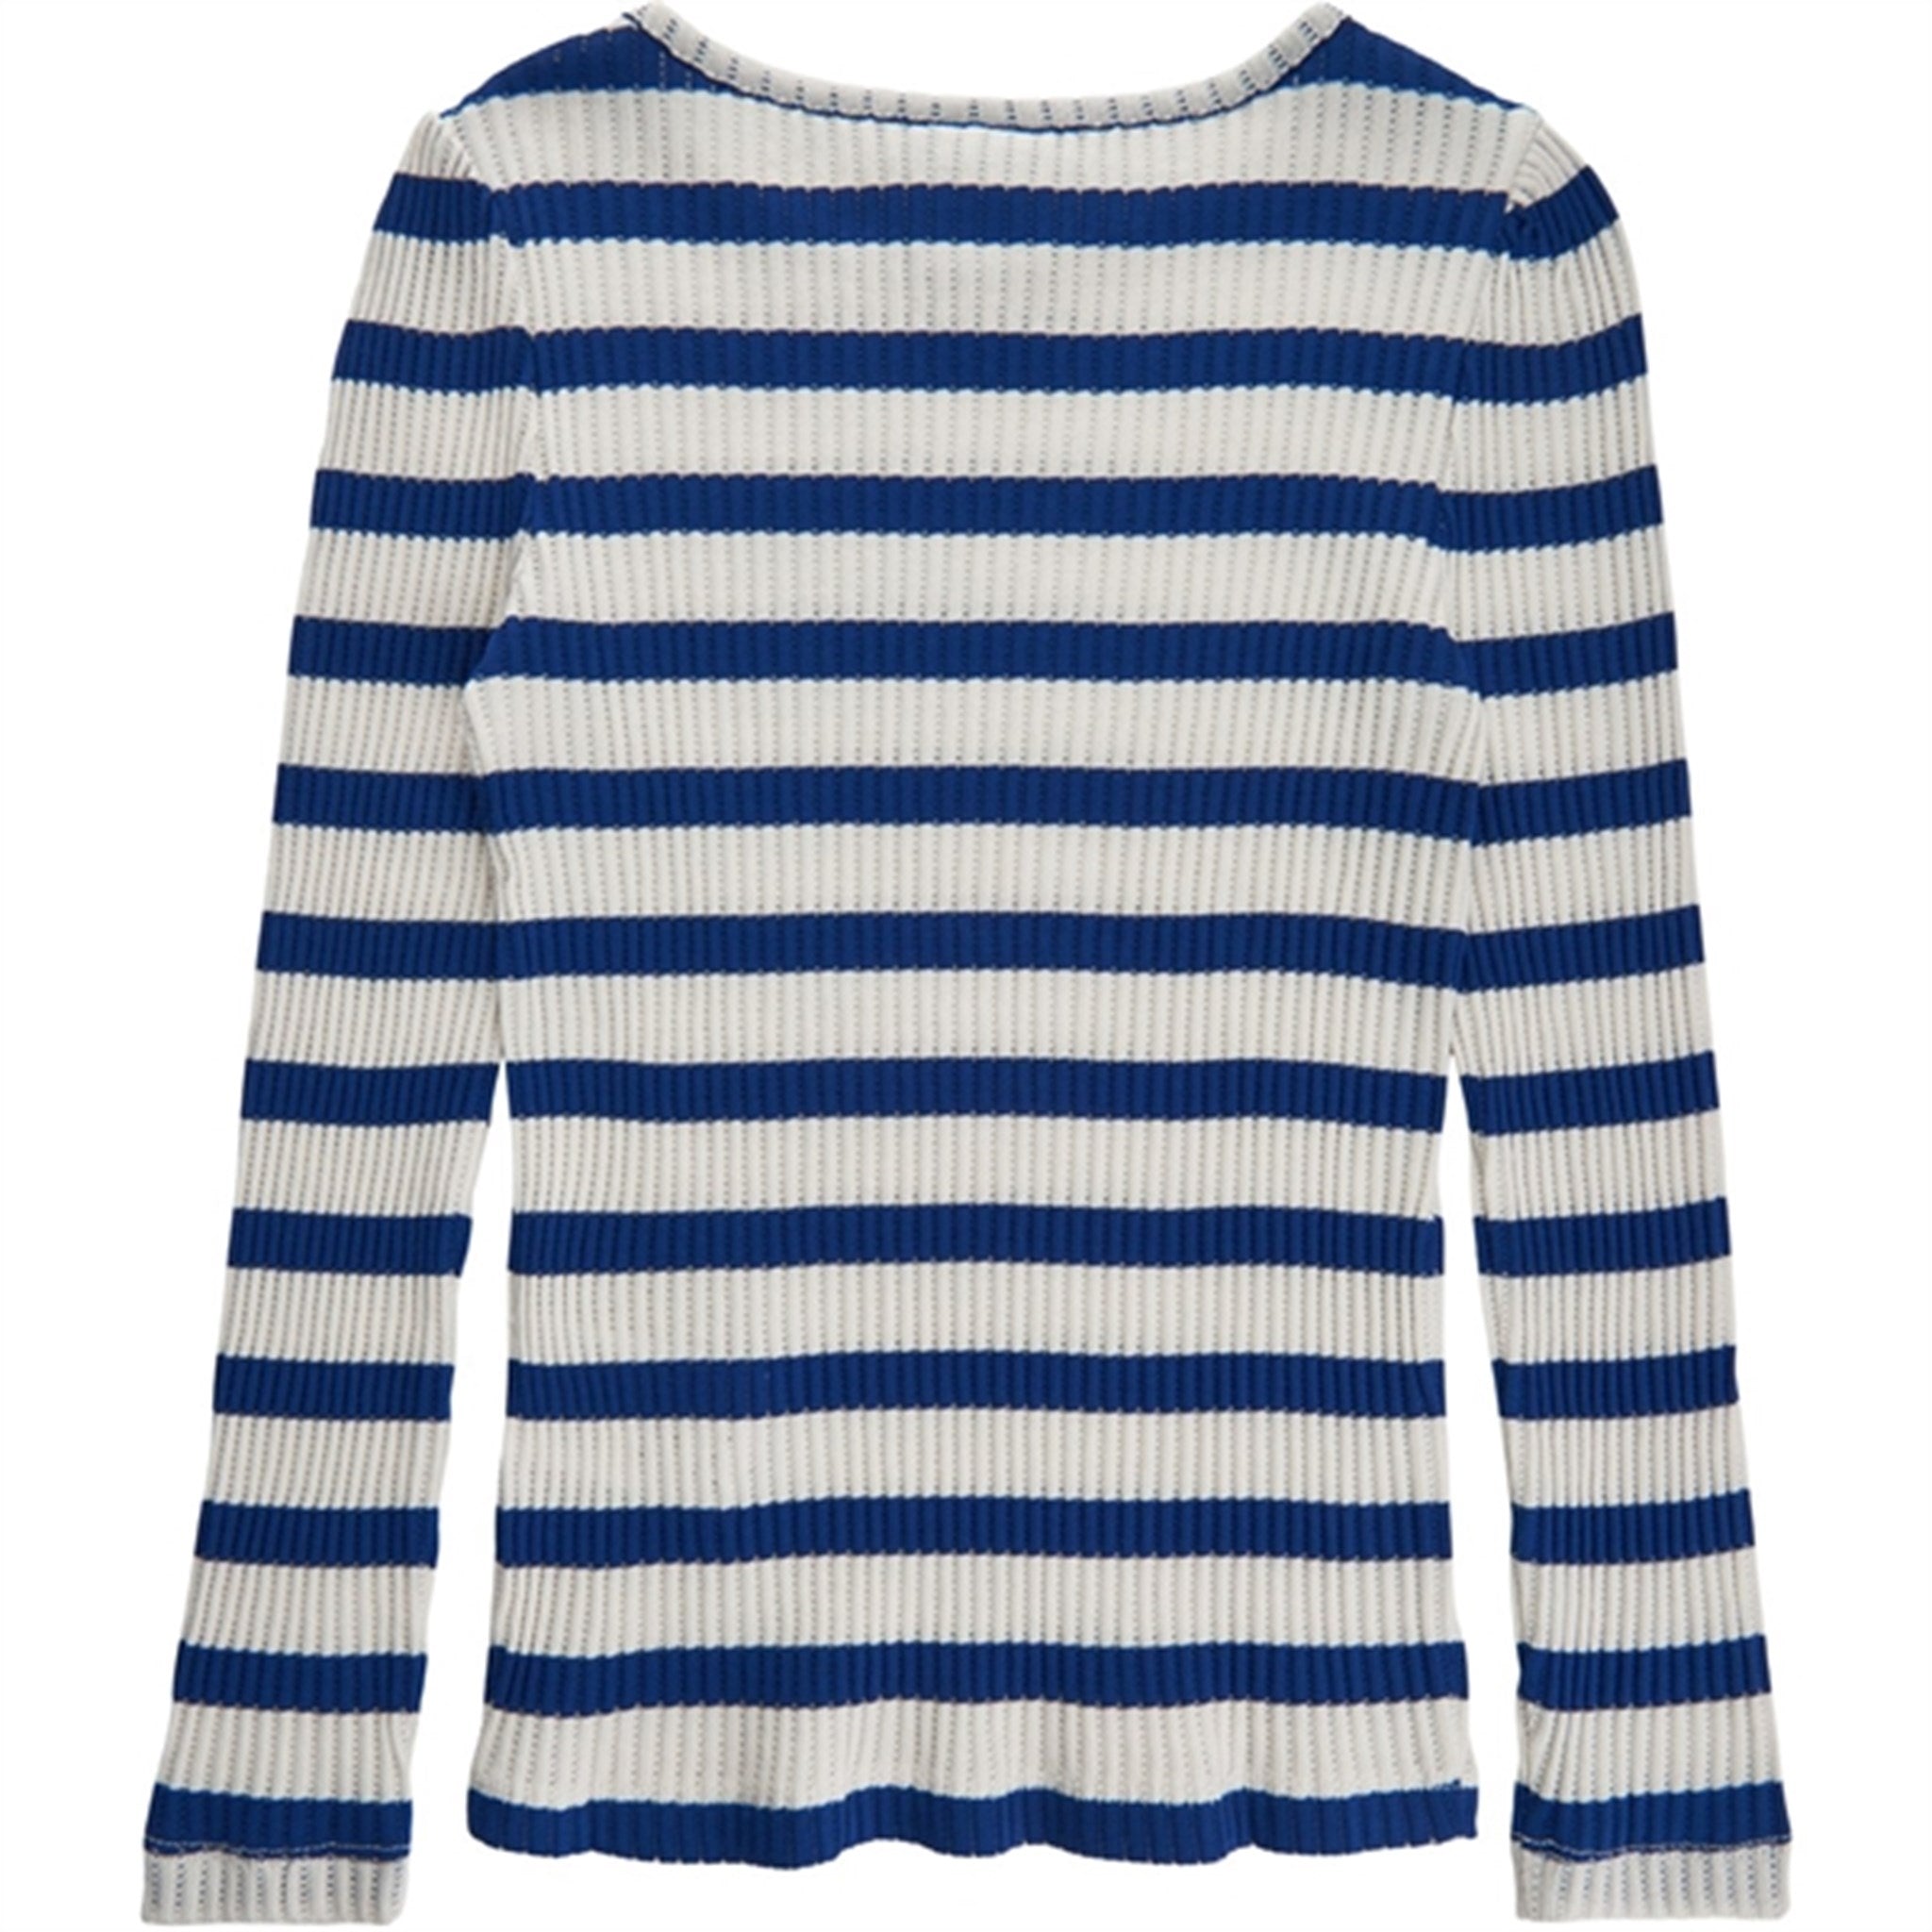 THE NEW White Swan/Limoges Striped Bluse 4